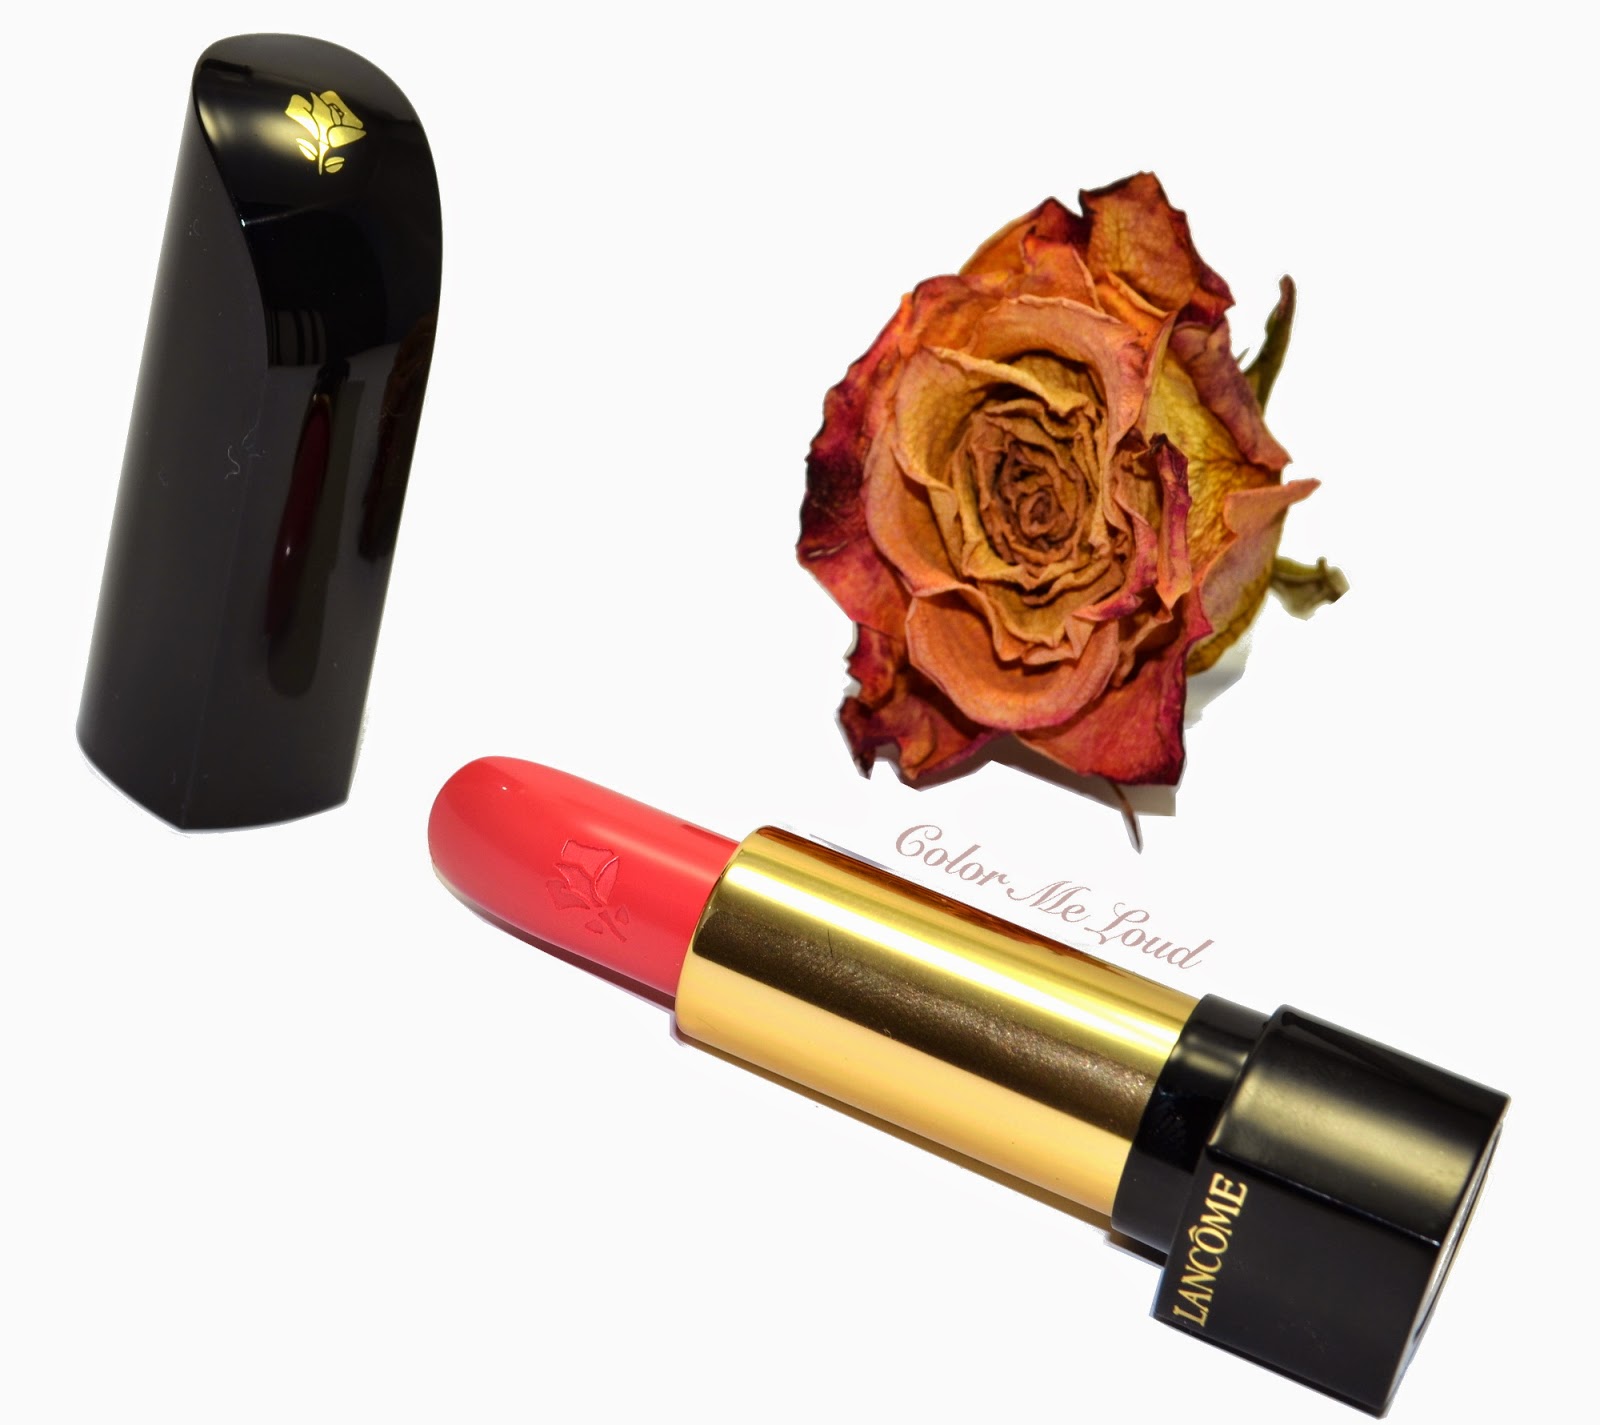 Lancôme L'Absolu Rouge #246 Rose Comtesse for the Roses Collection, Review, Swatch & FOTD 